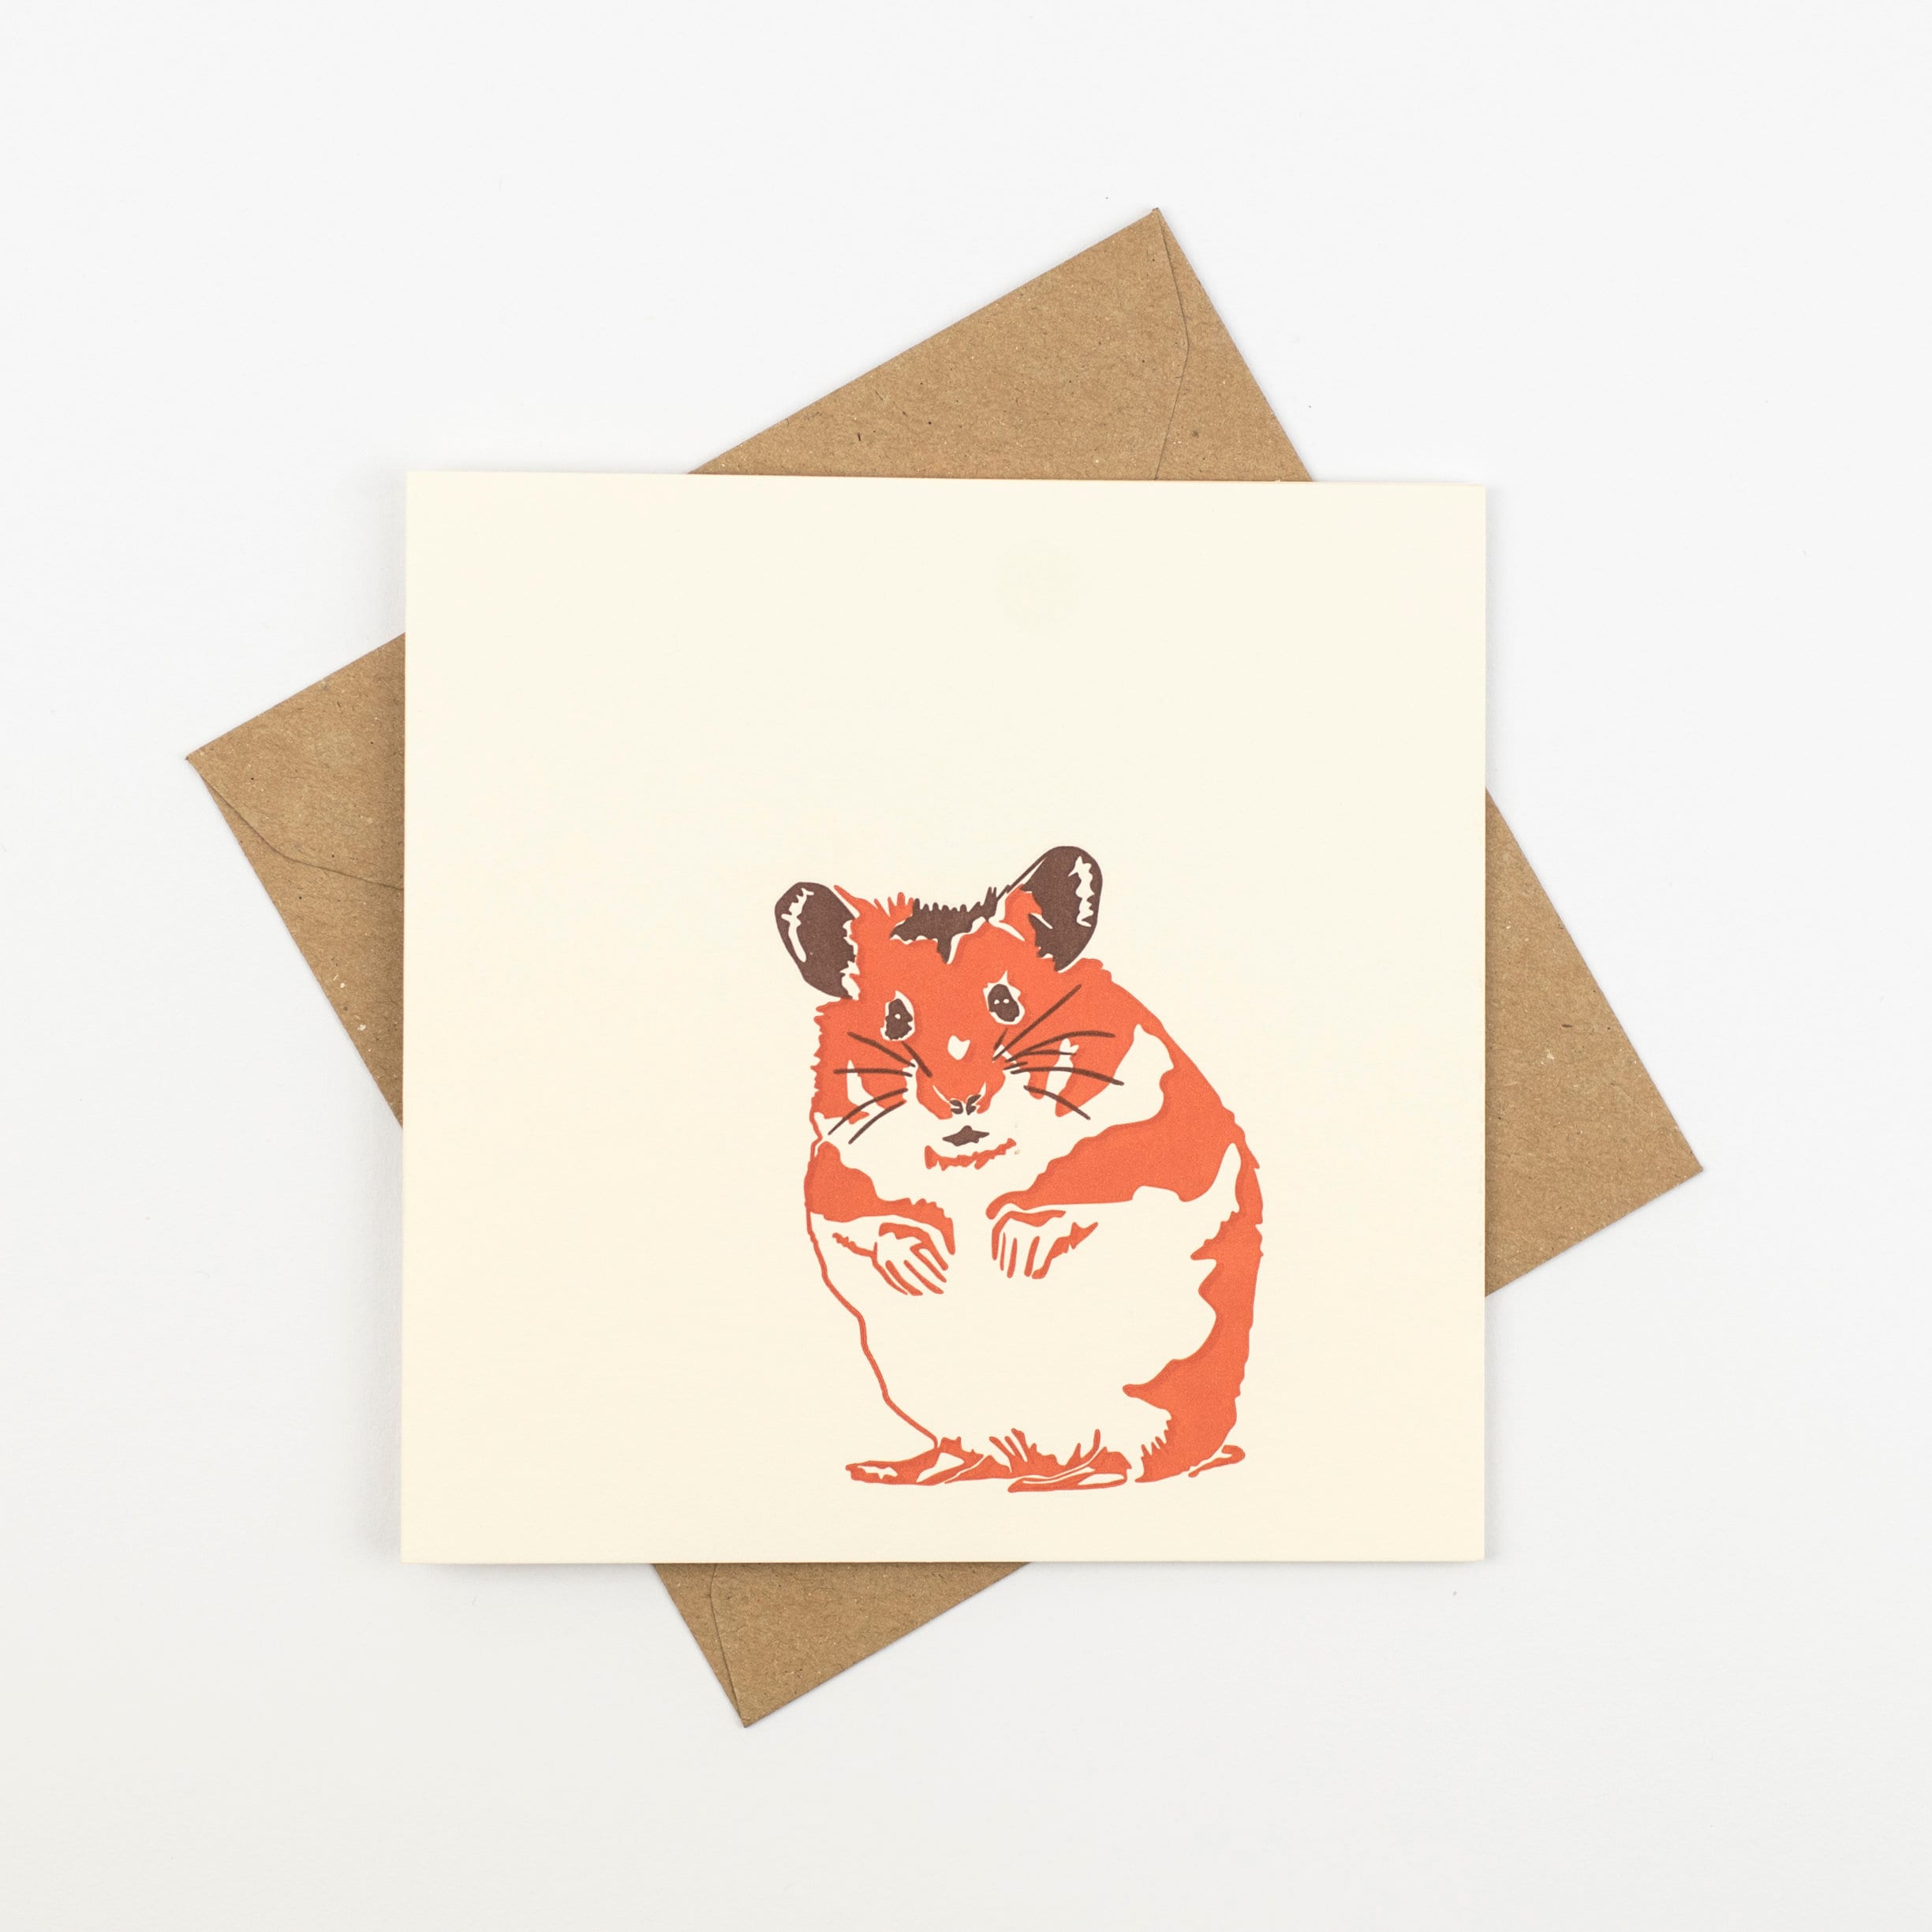 - Free Delivery & Same Day Dispatch Before 2pm Mon-Fri Square 6x6 Approx Size Mix & Match on 6x6 Cards - Any 2 for £5 Wildlife Hamster Greeting Card 